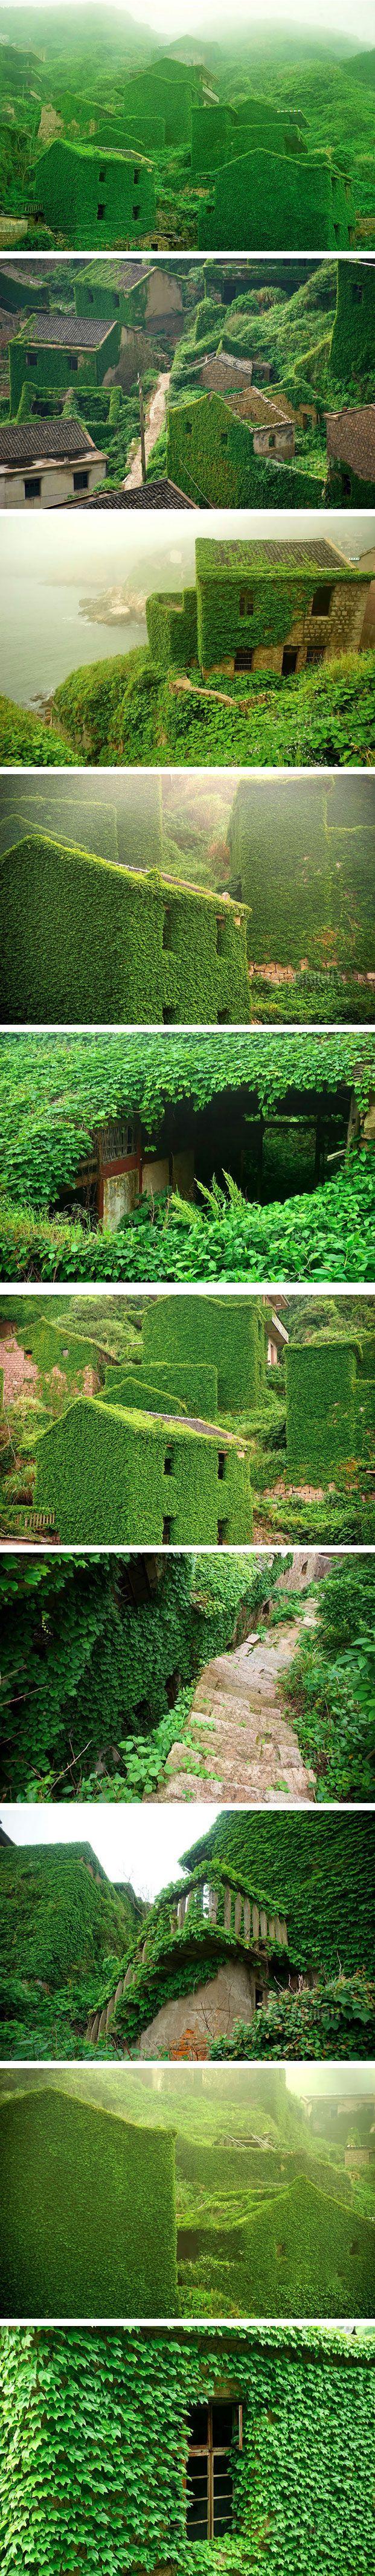 Hochzeit - Photographer Captures Amazing Images Of An Abandoned Chinese Fishing Village Being Reclaimed By Nature